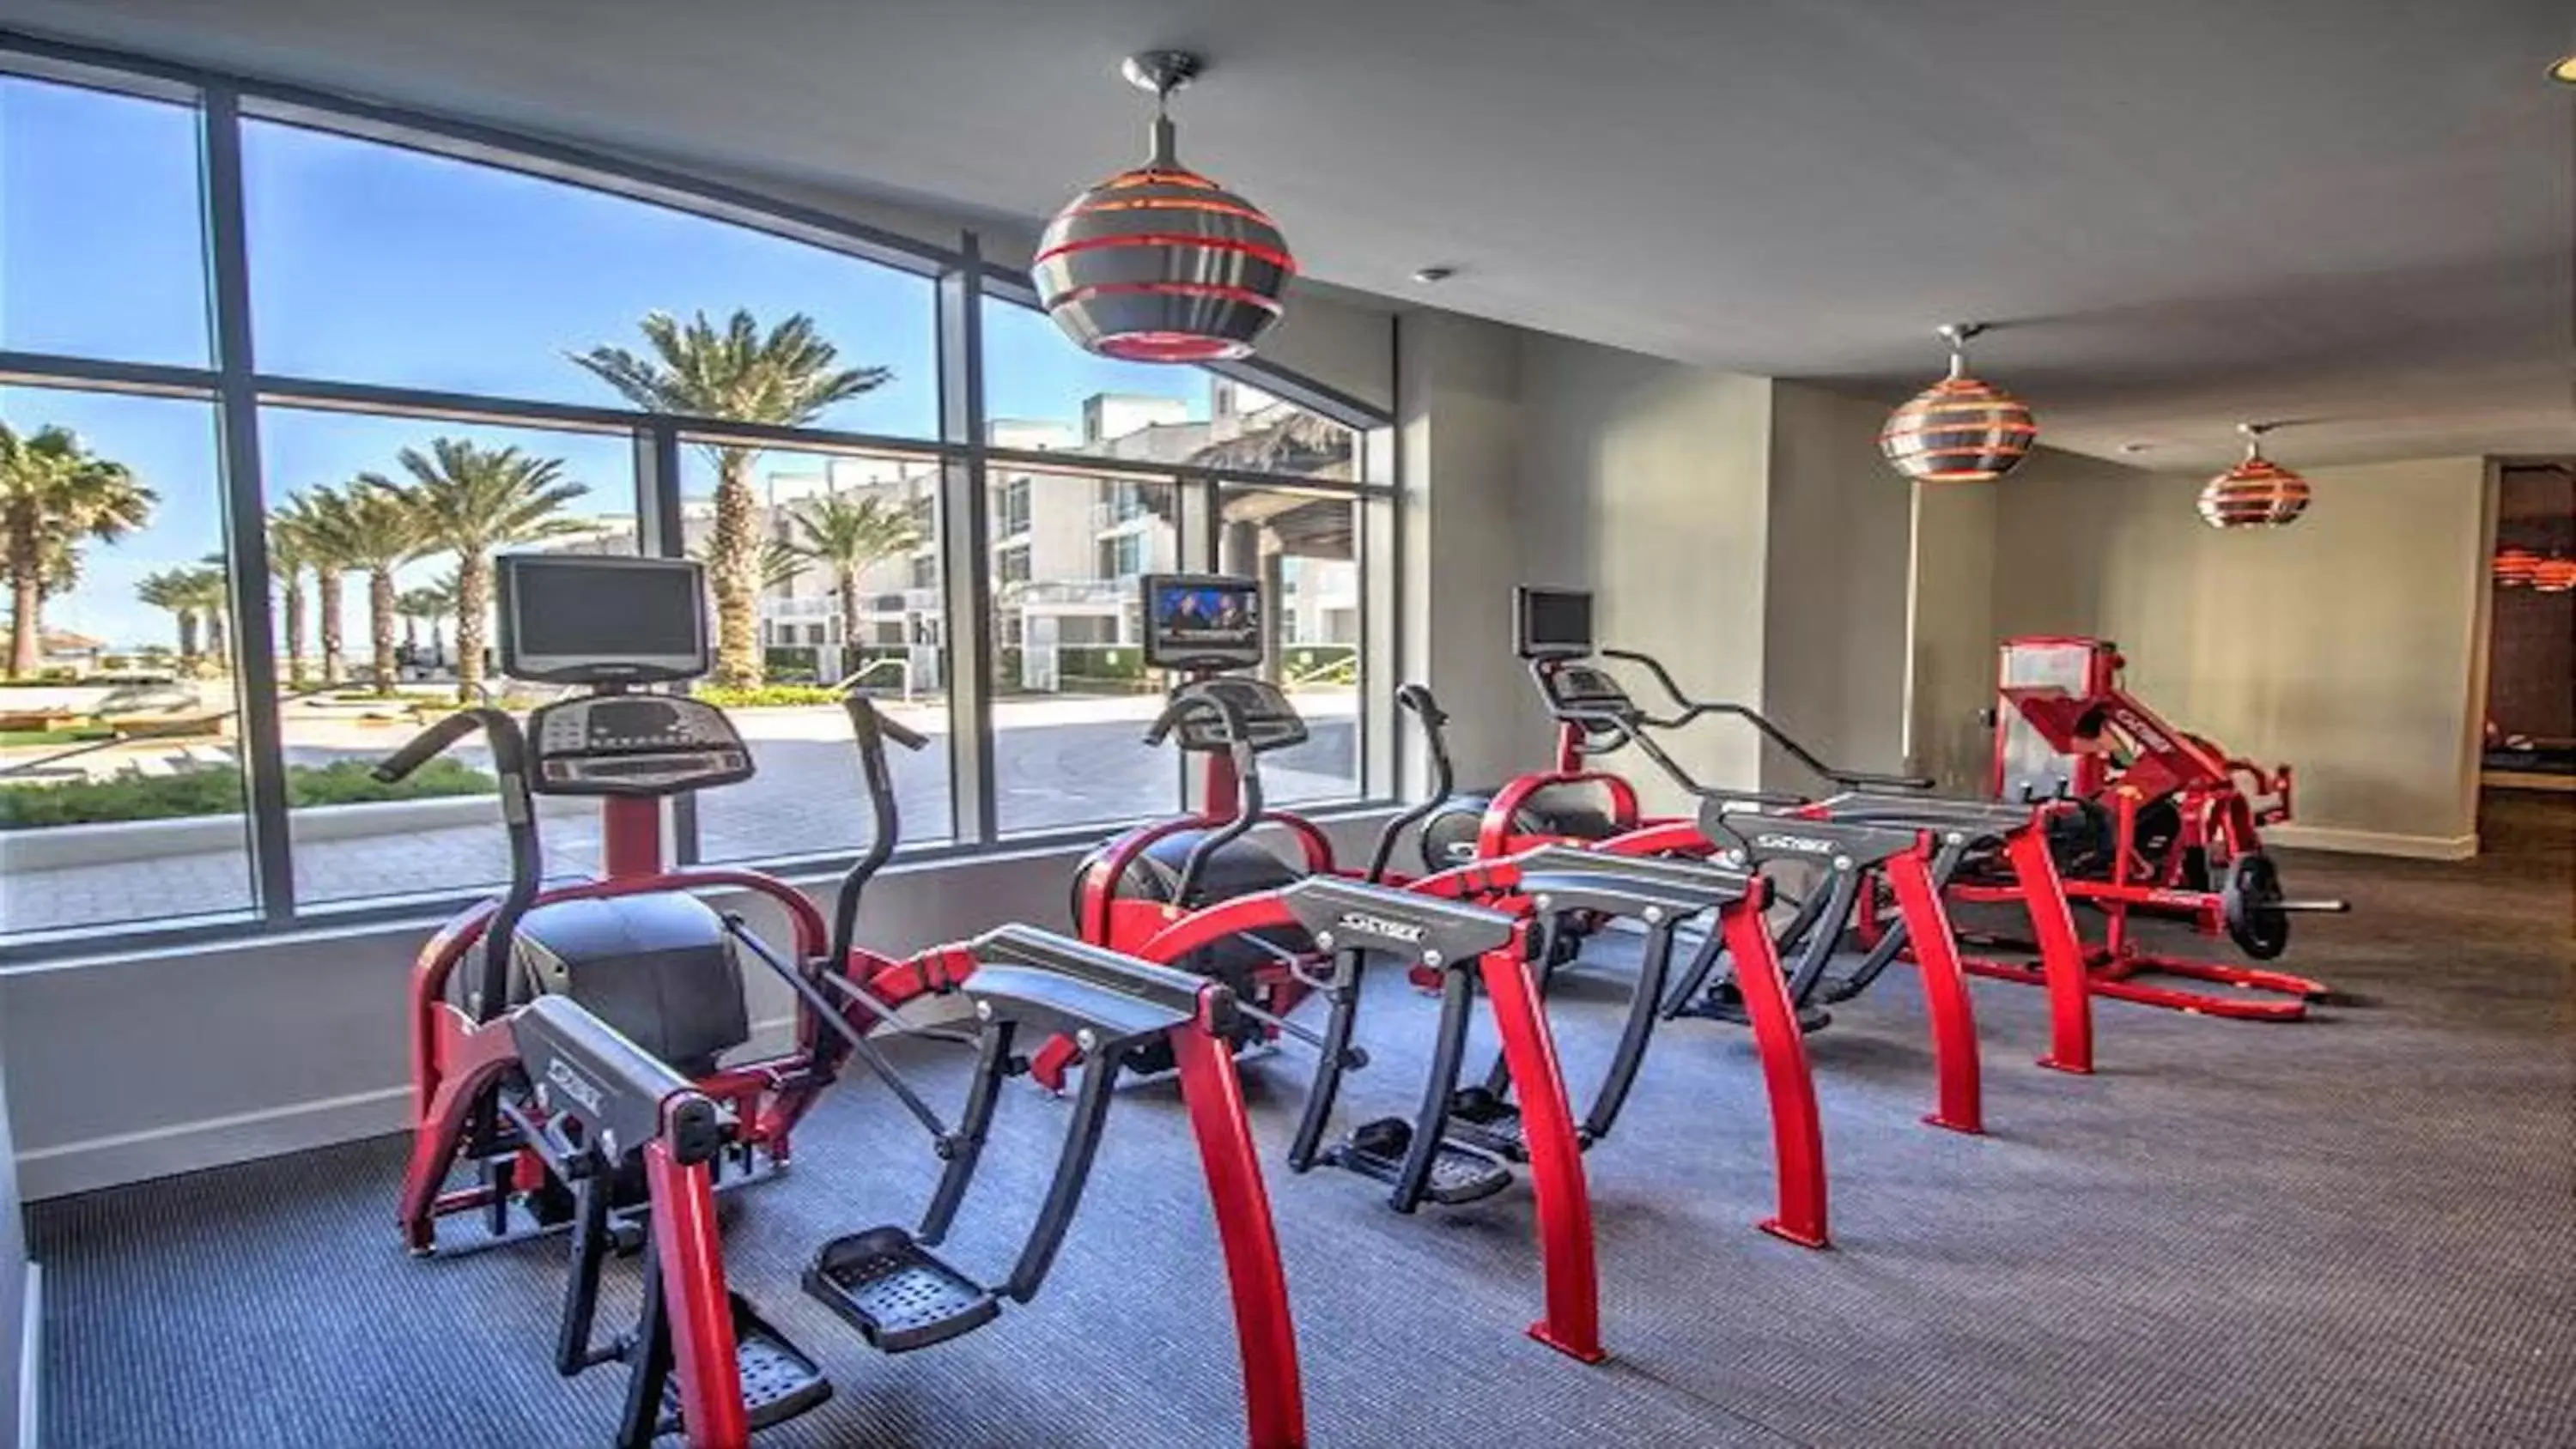 Fitness centre/facilities, Fitness Center/Facilities in Margaritaville Beach Resort South Padre Island